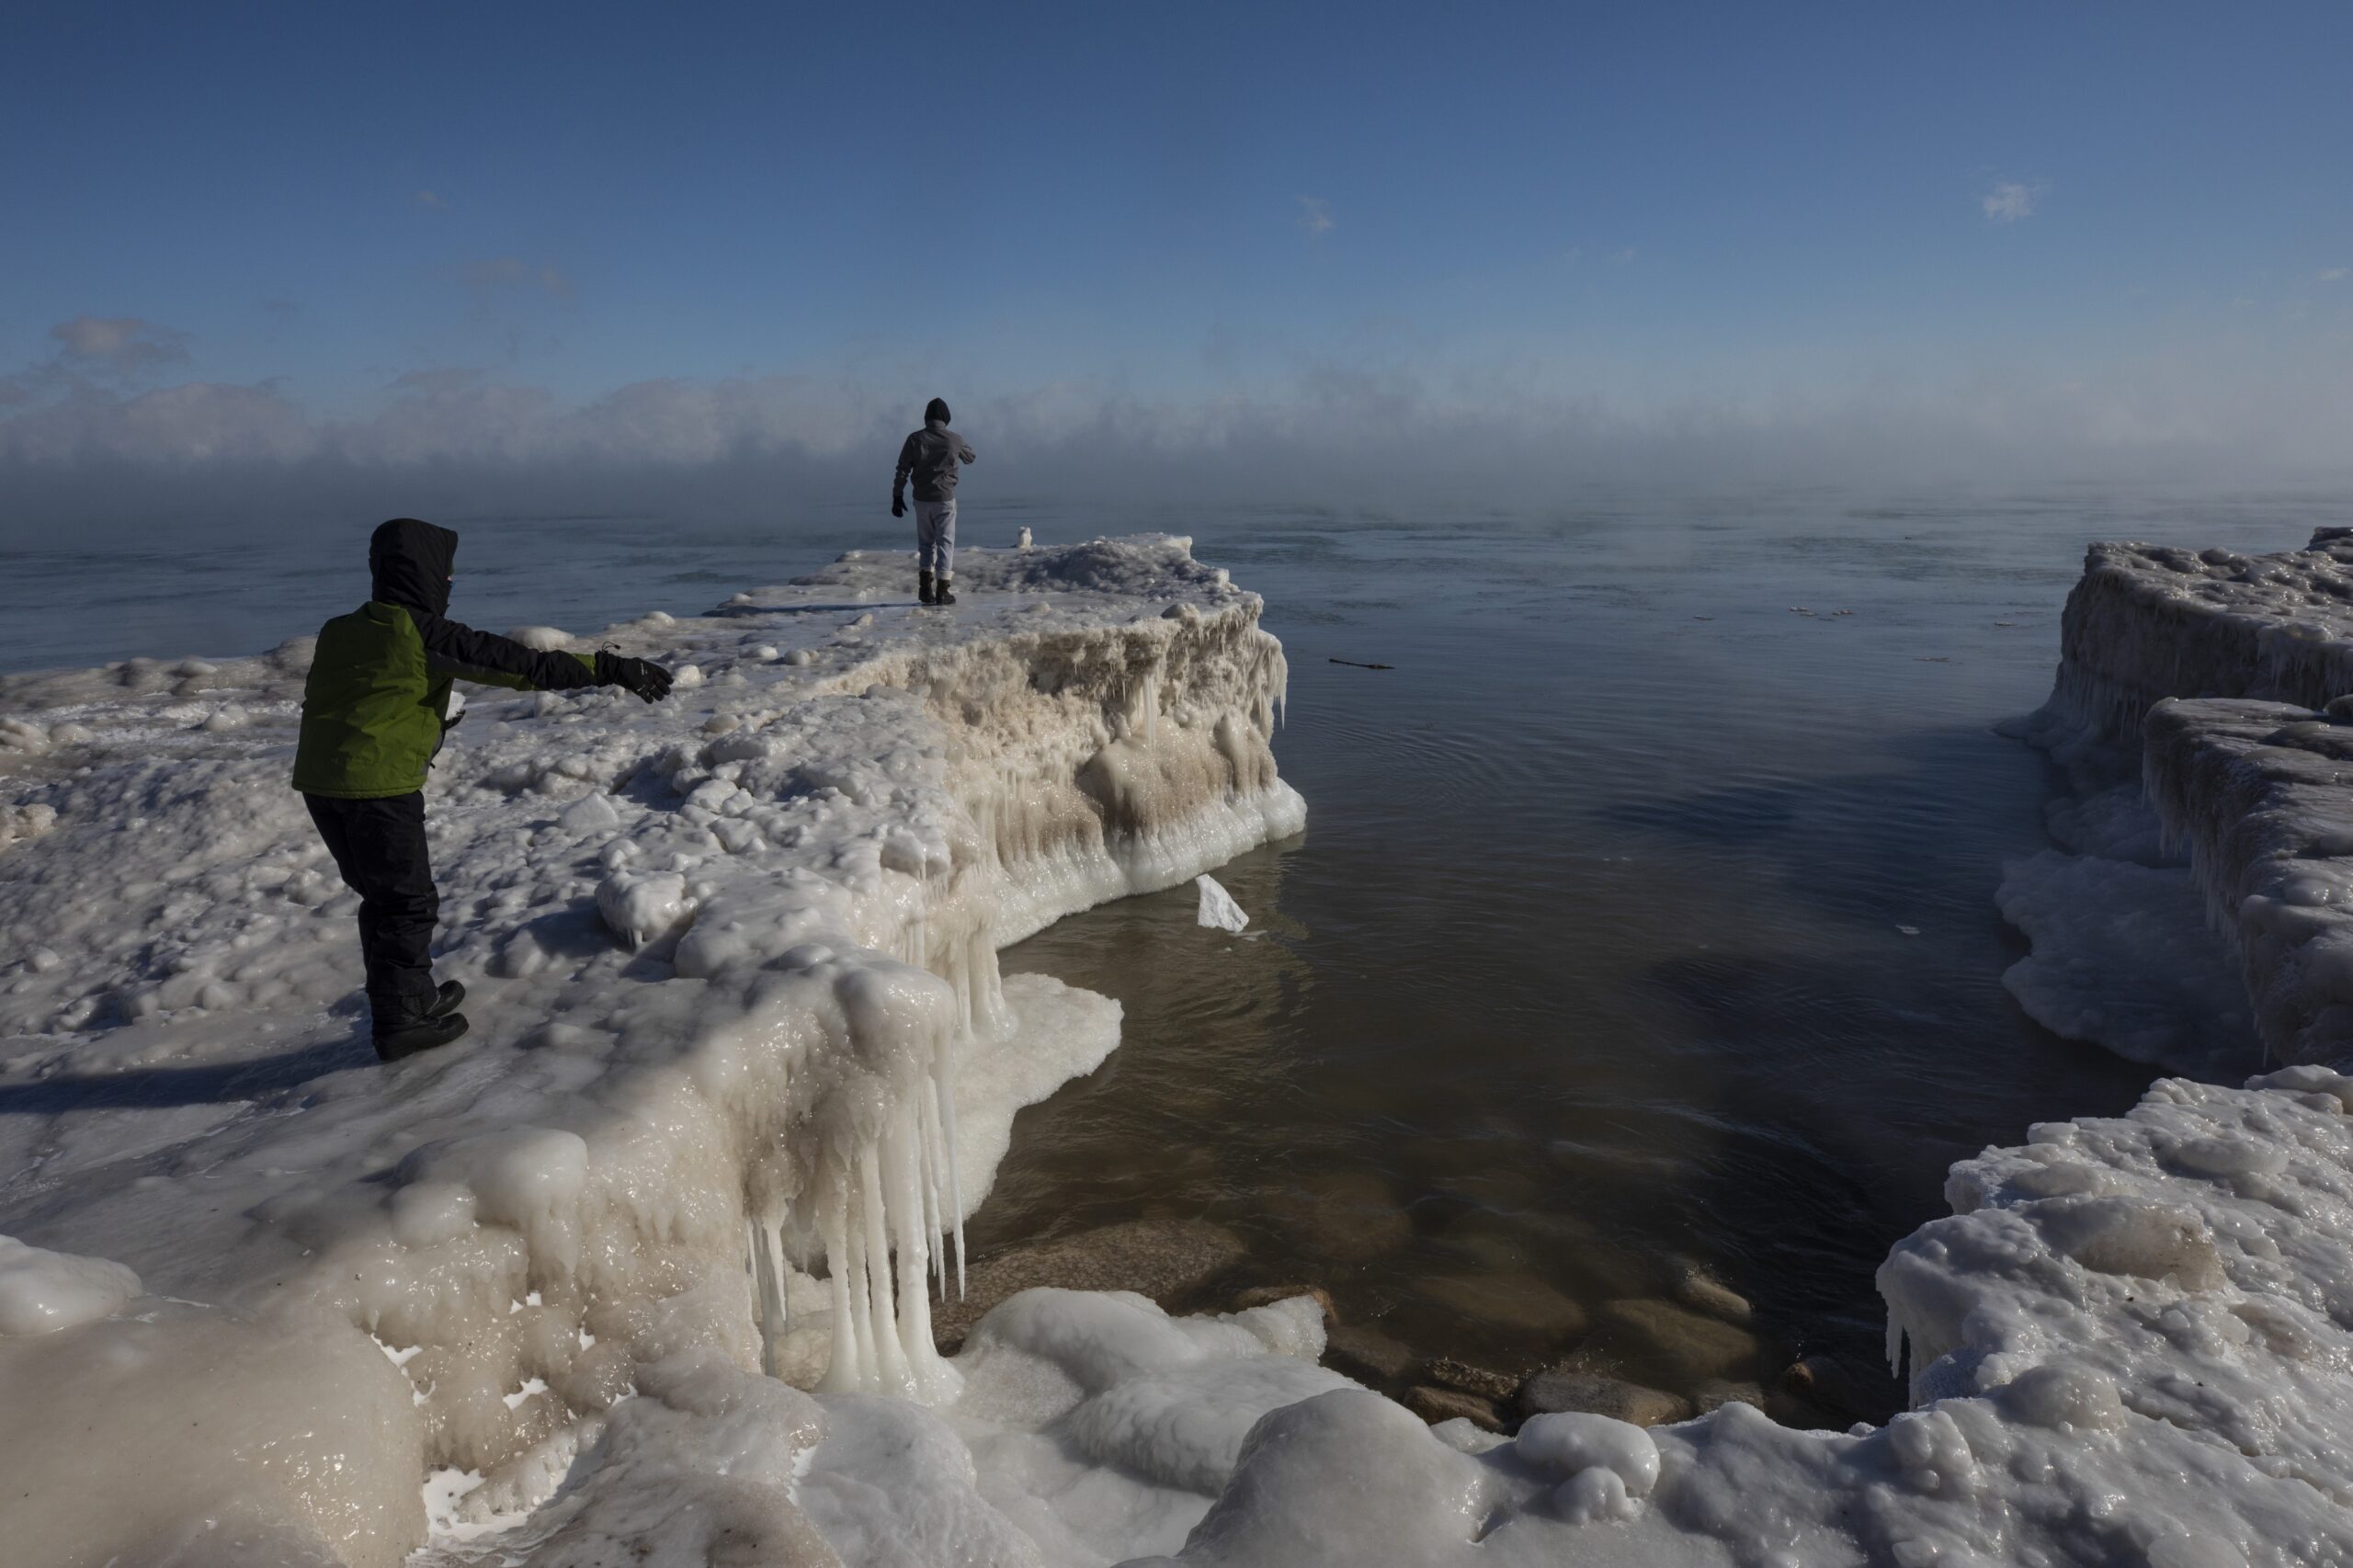 A young boy tosses a chunk of snow into Lake Michigan